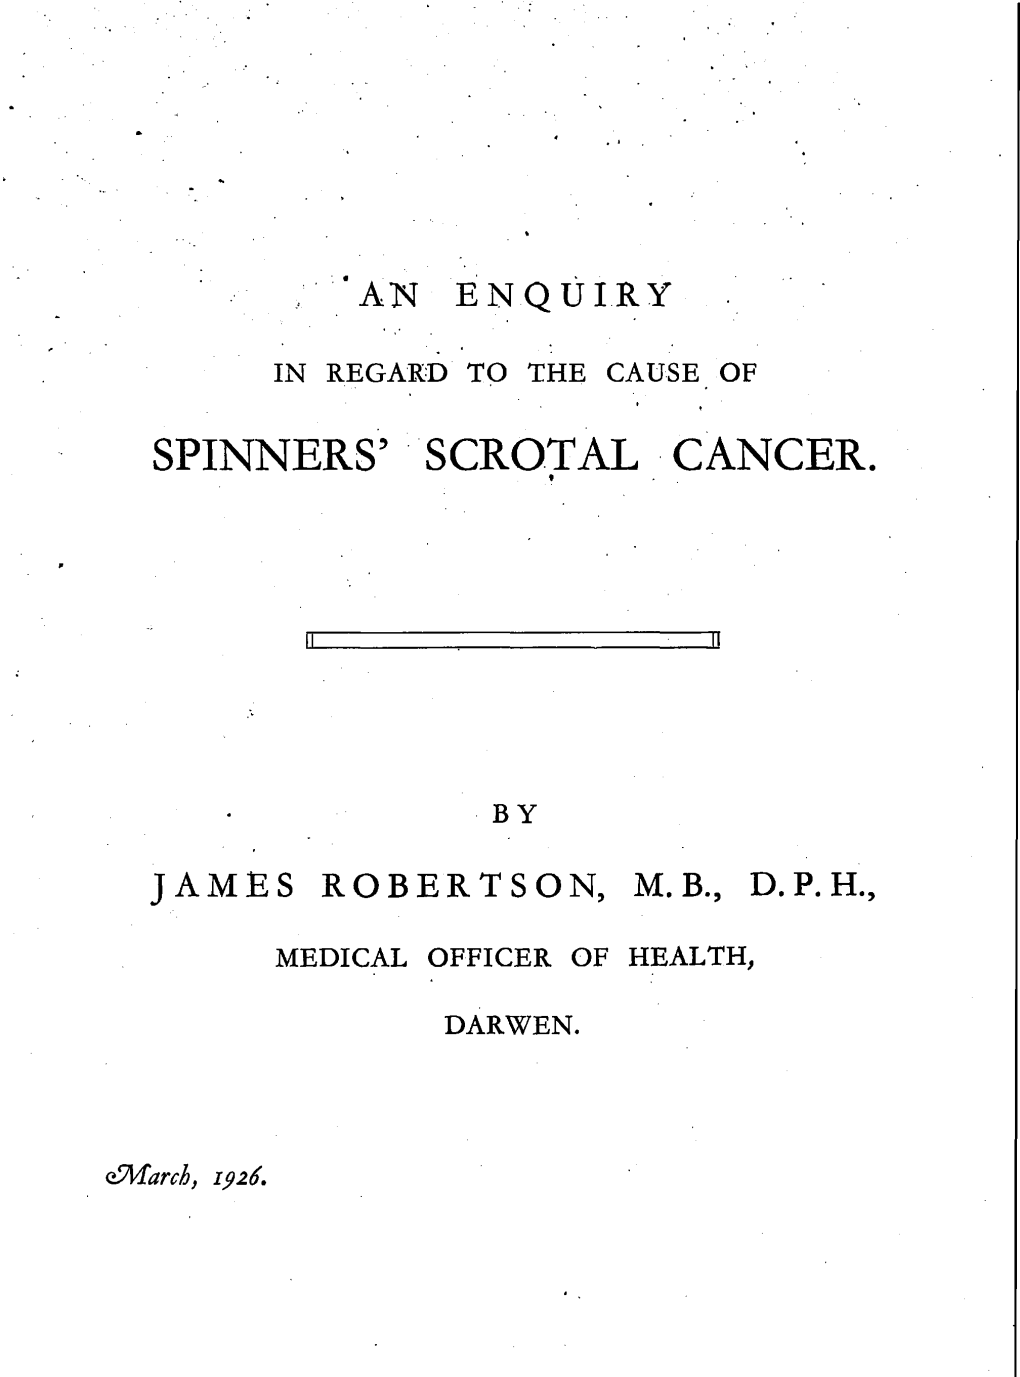 Spinners' Scrotal Cancer